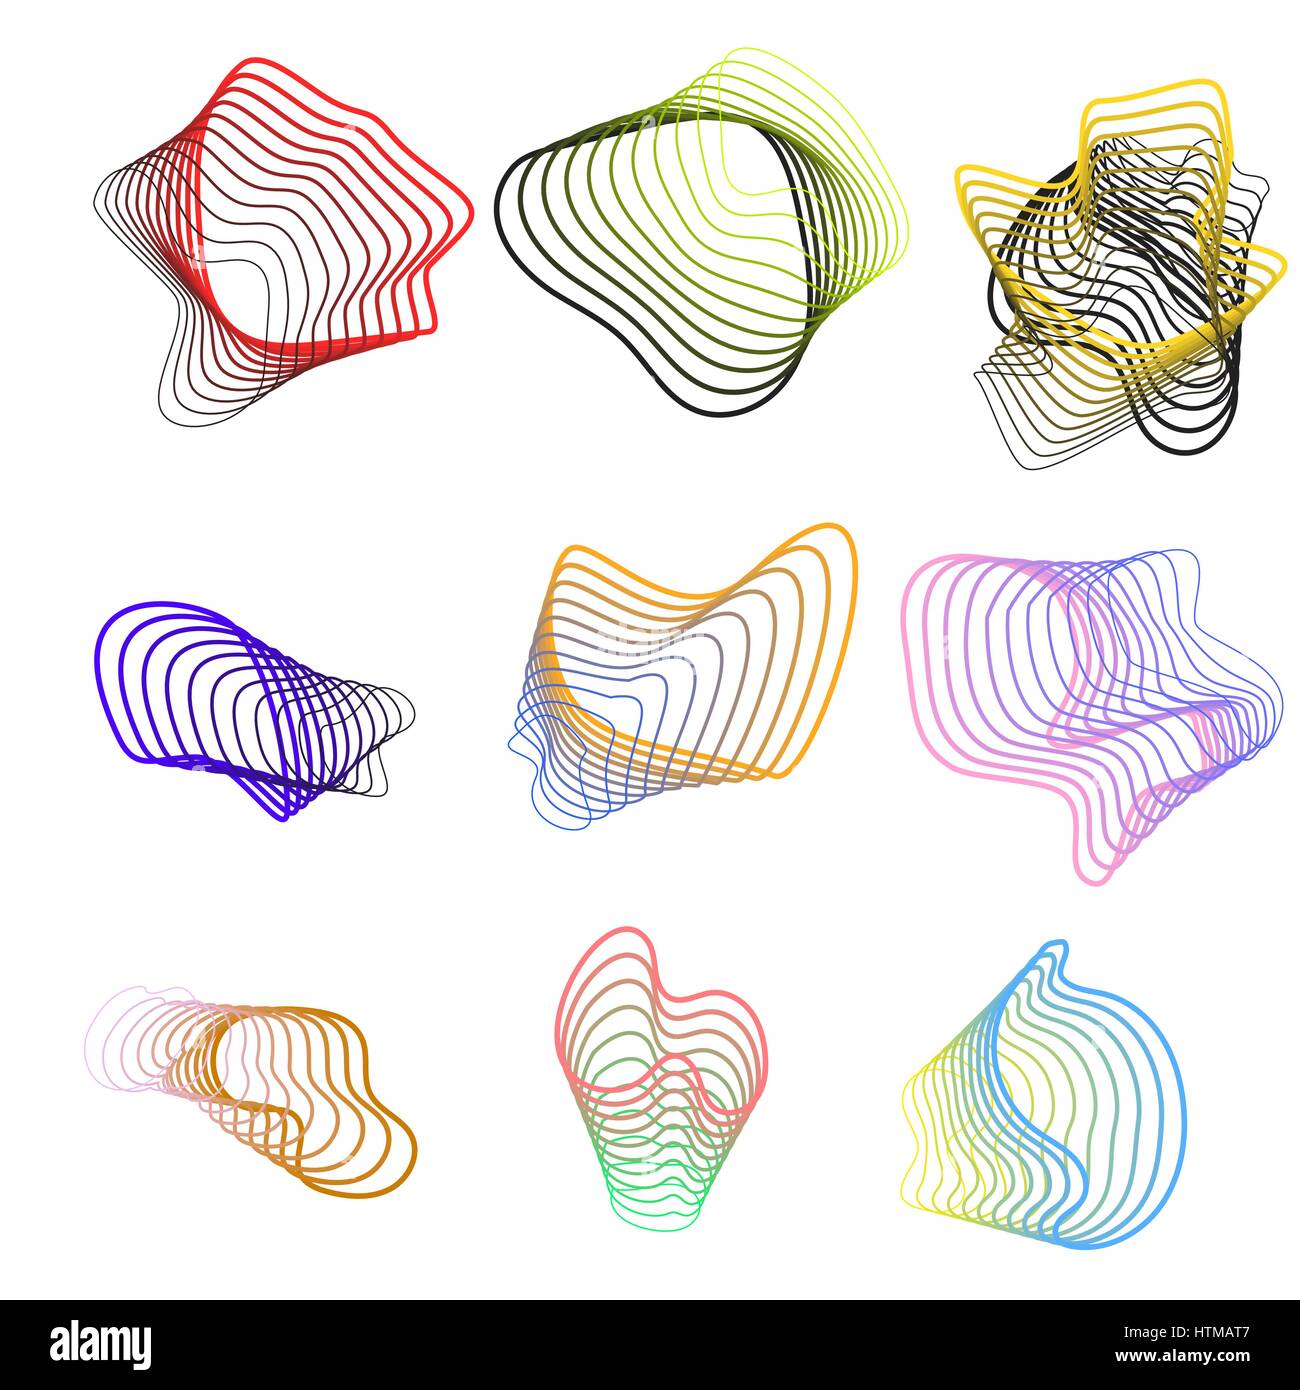 Abstract spiral lines vector icons. Stock Vector